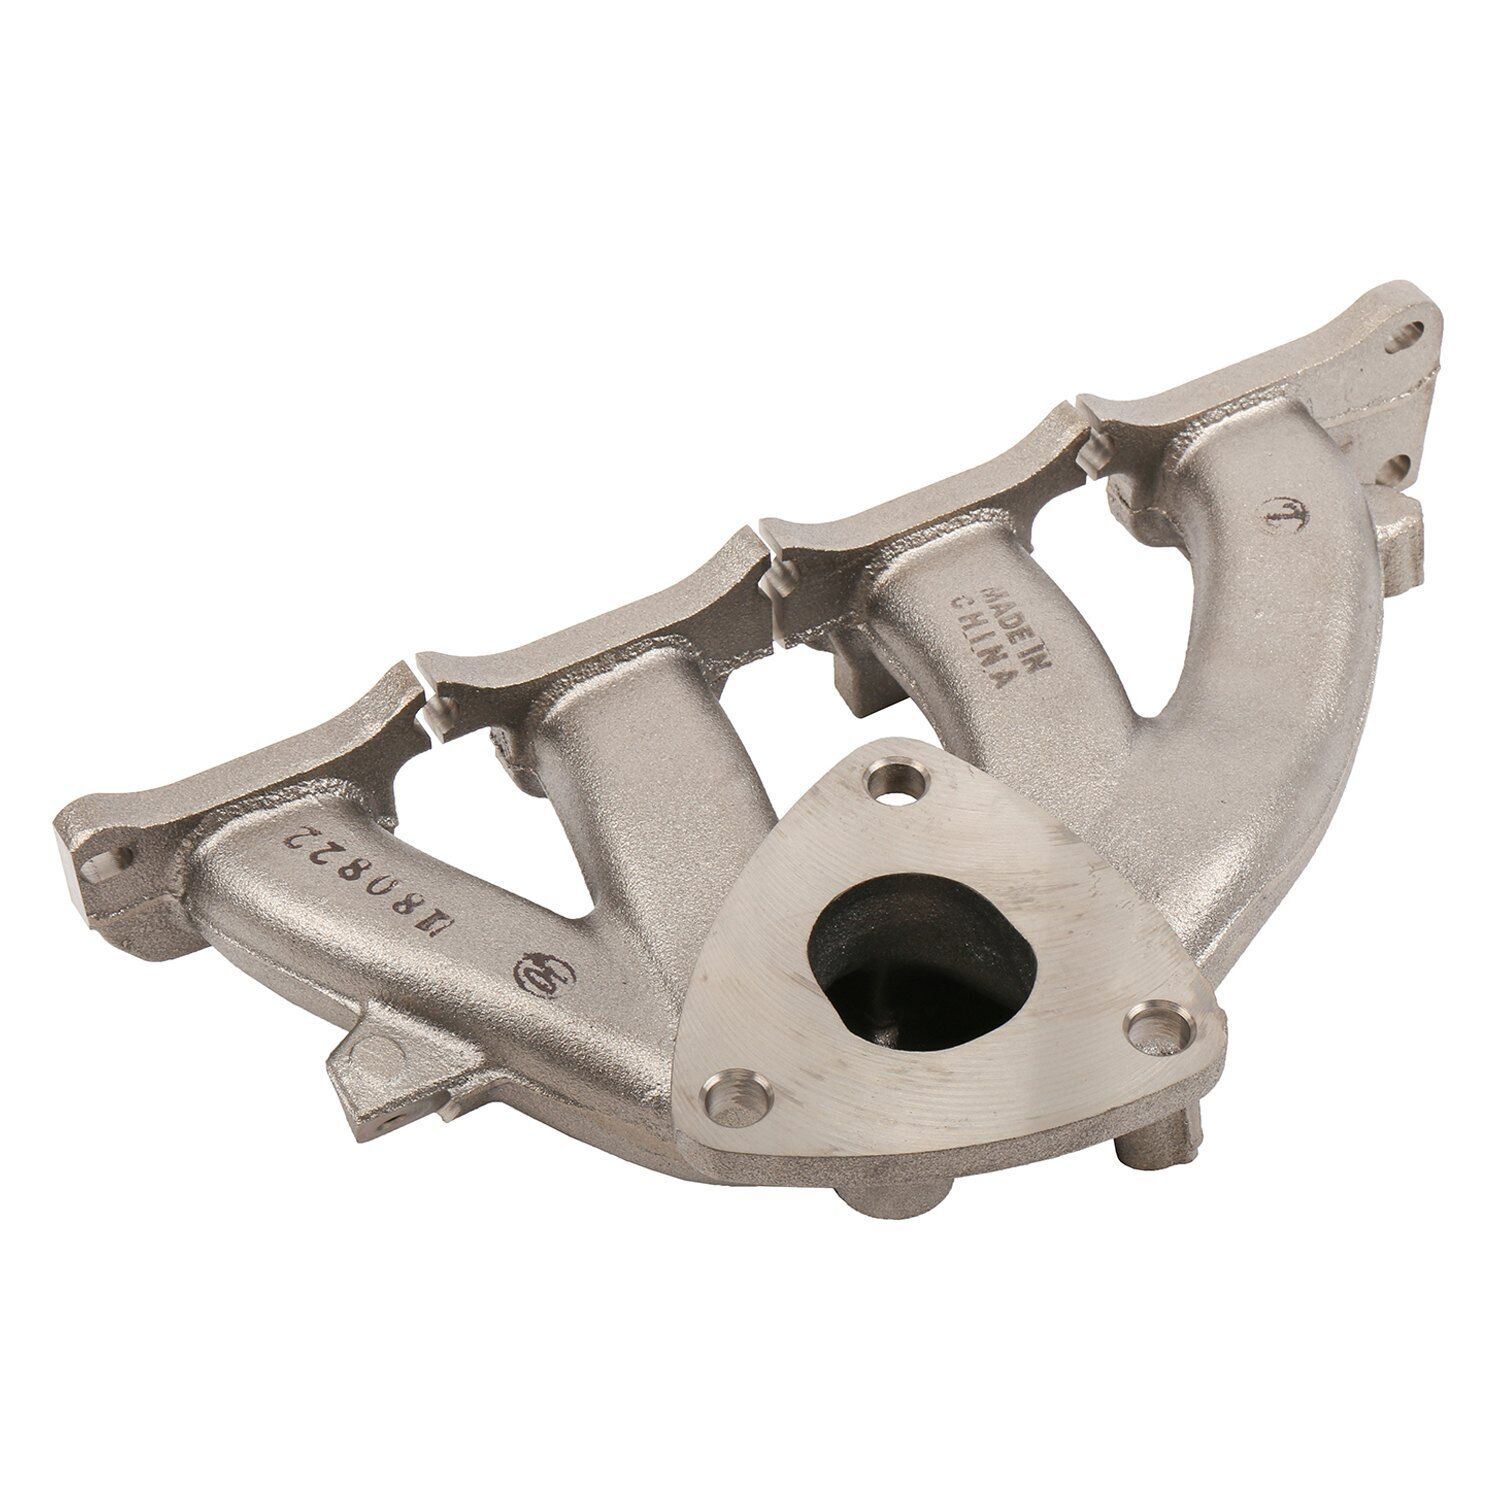 For Chevy Equinox 10-14 ACDelco Genuine GM Parts Cast Iron Exhaust Manifold